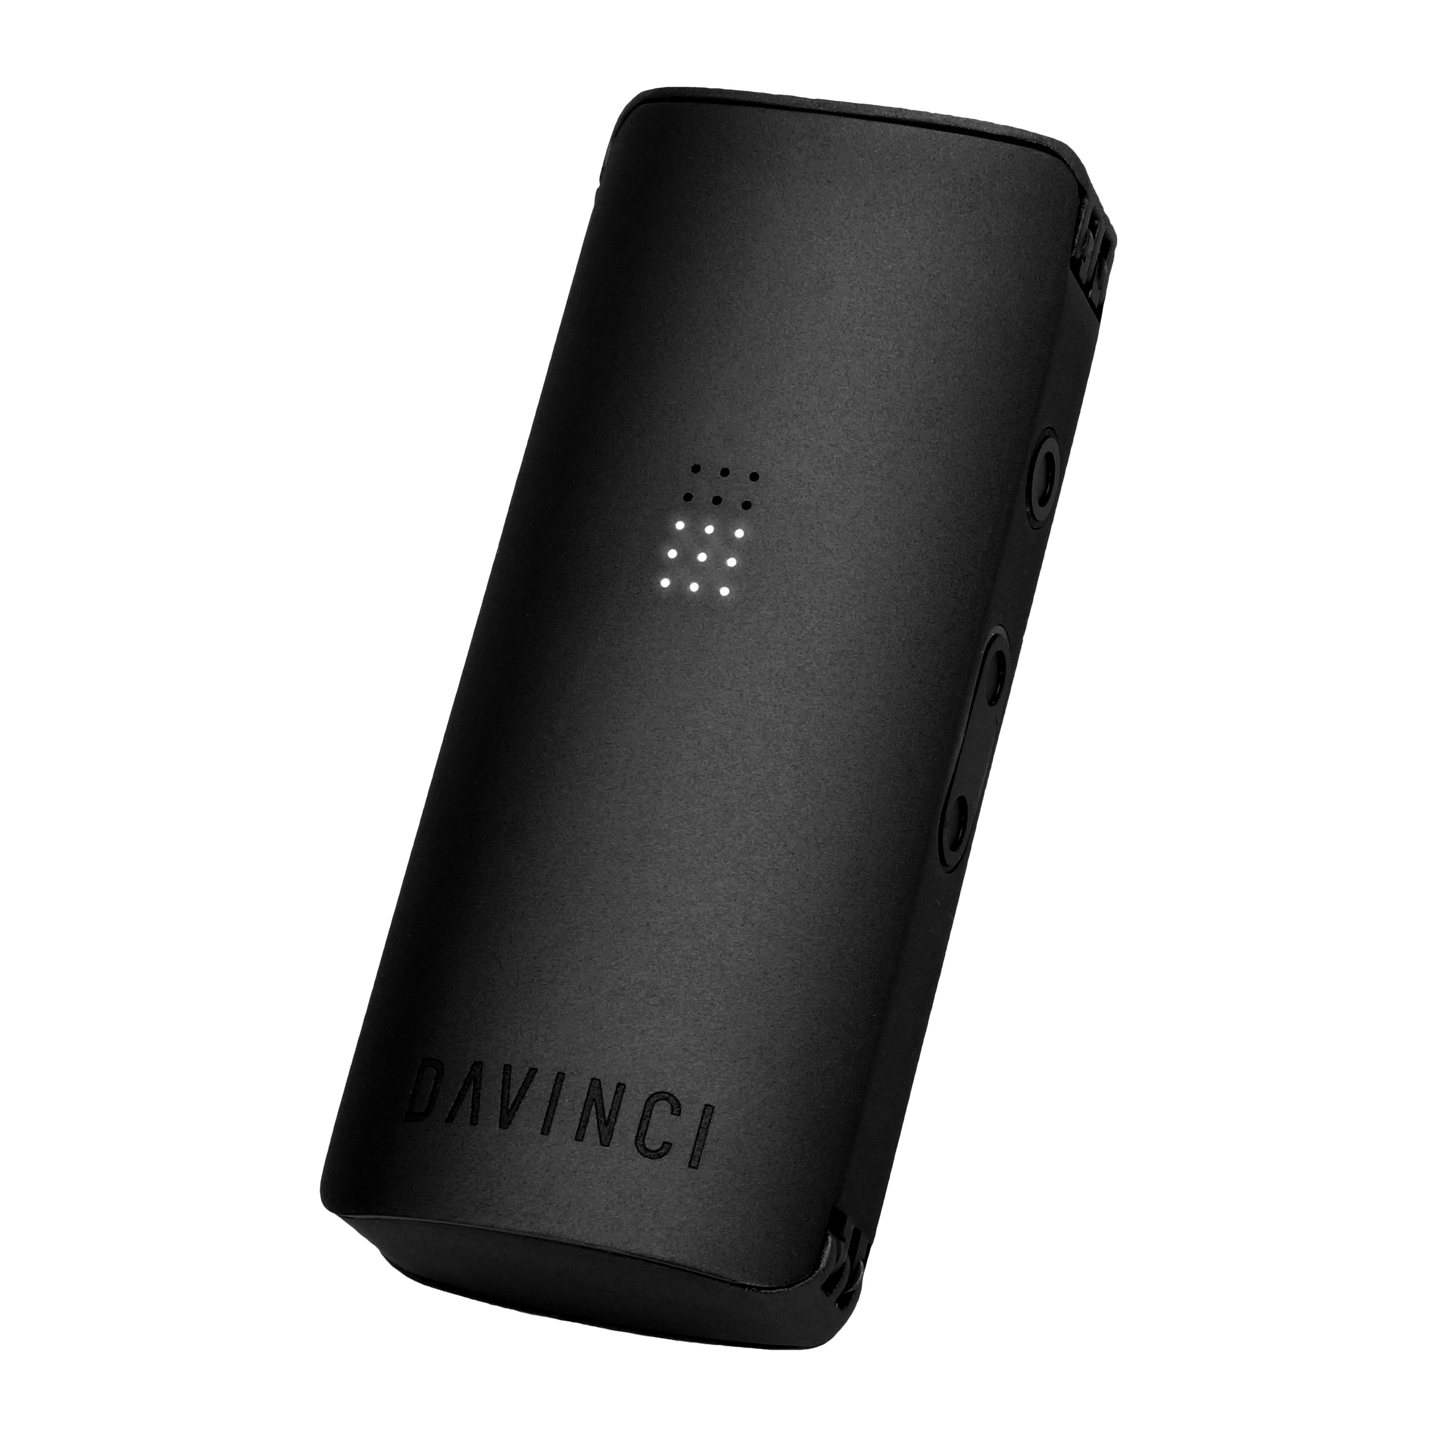 Davinci MIQRO Pocket Vaporizer - dry herbs and concentrates. Onyx